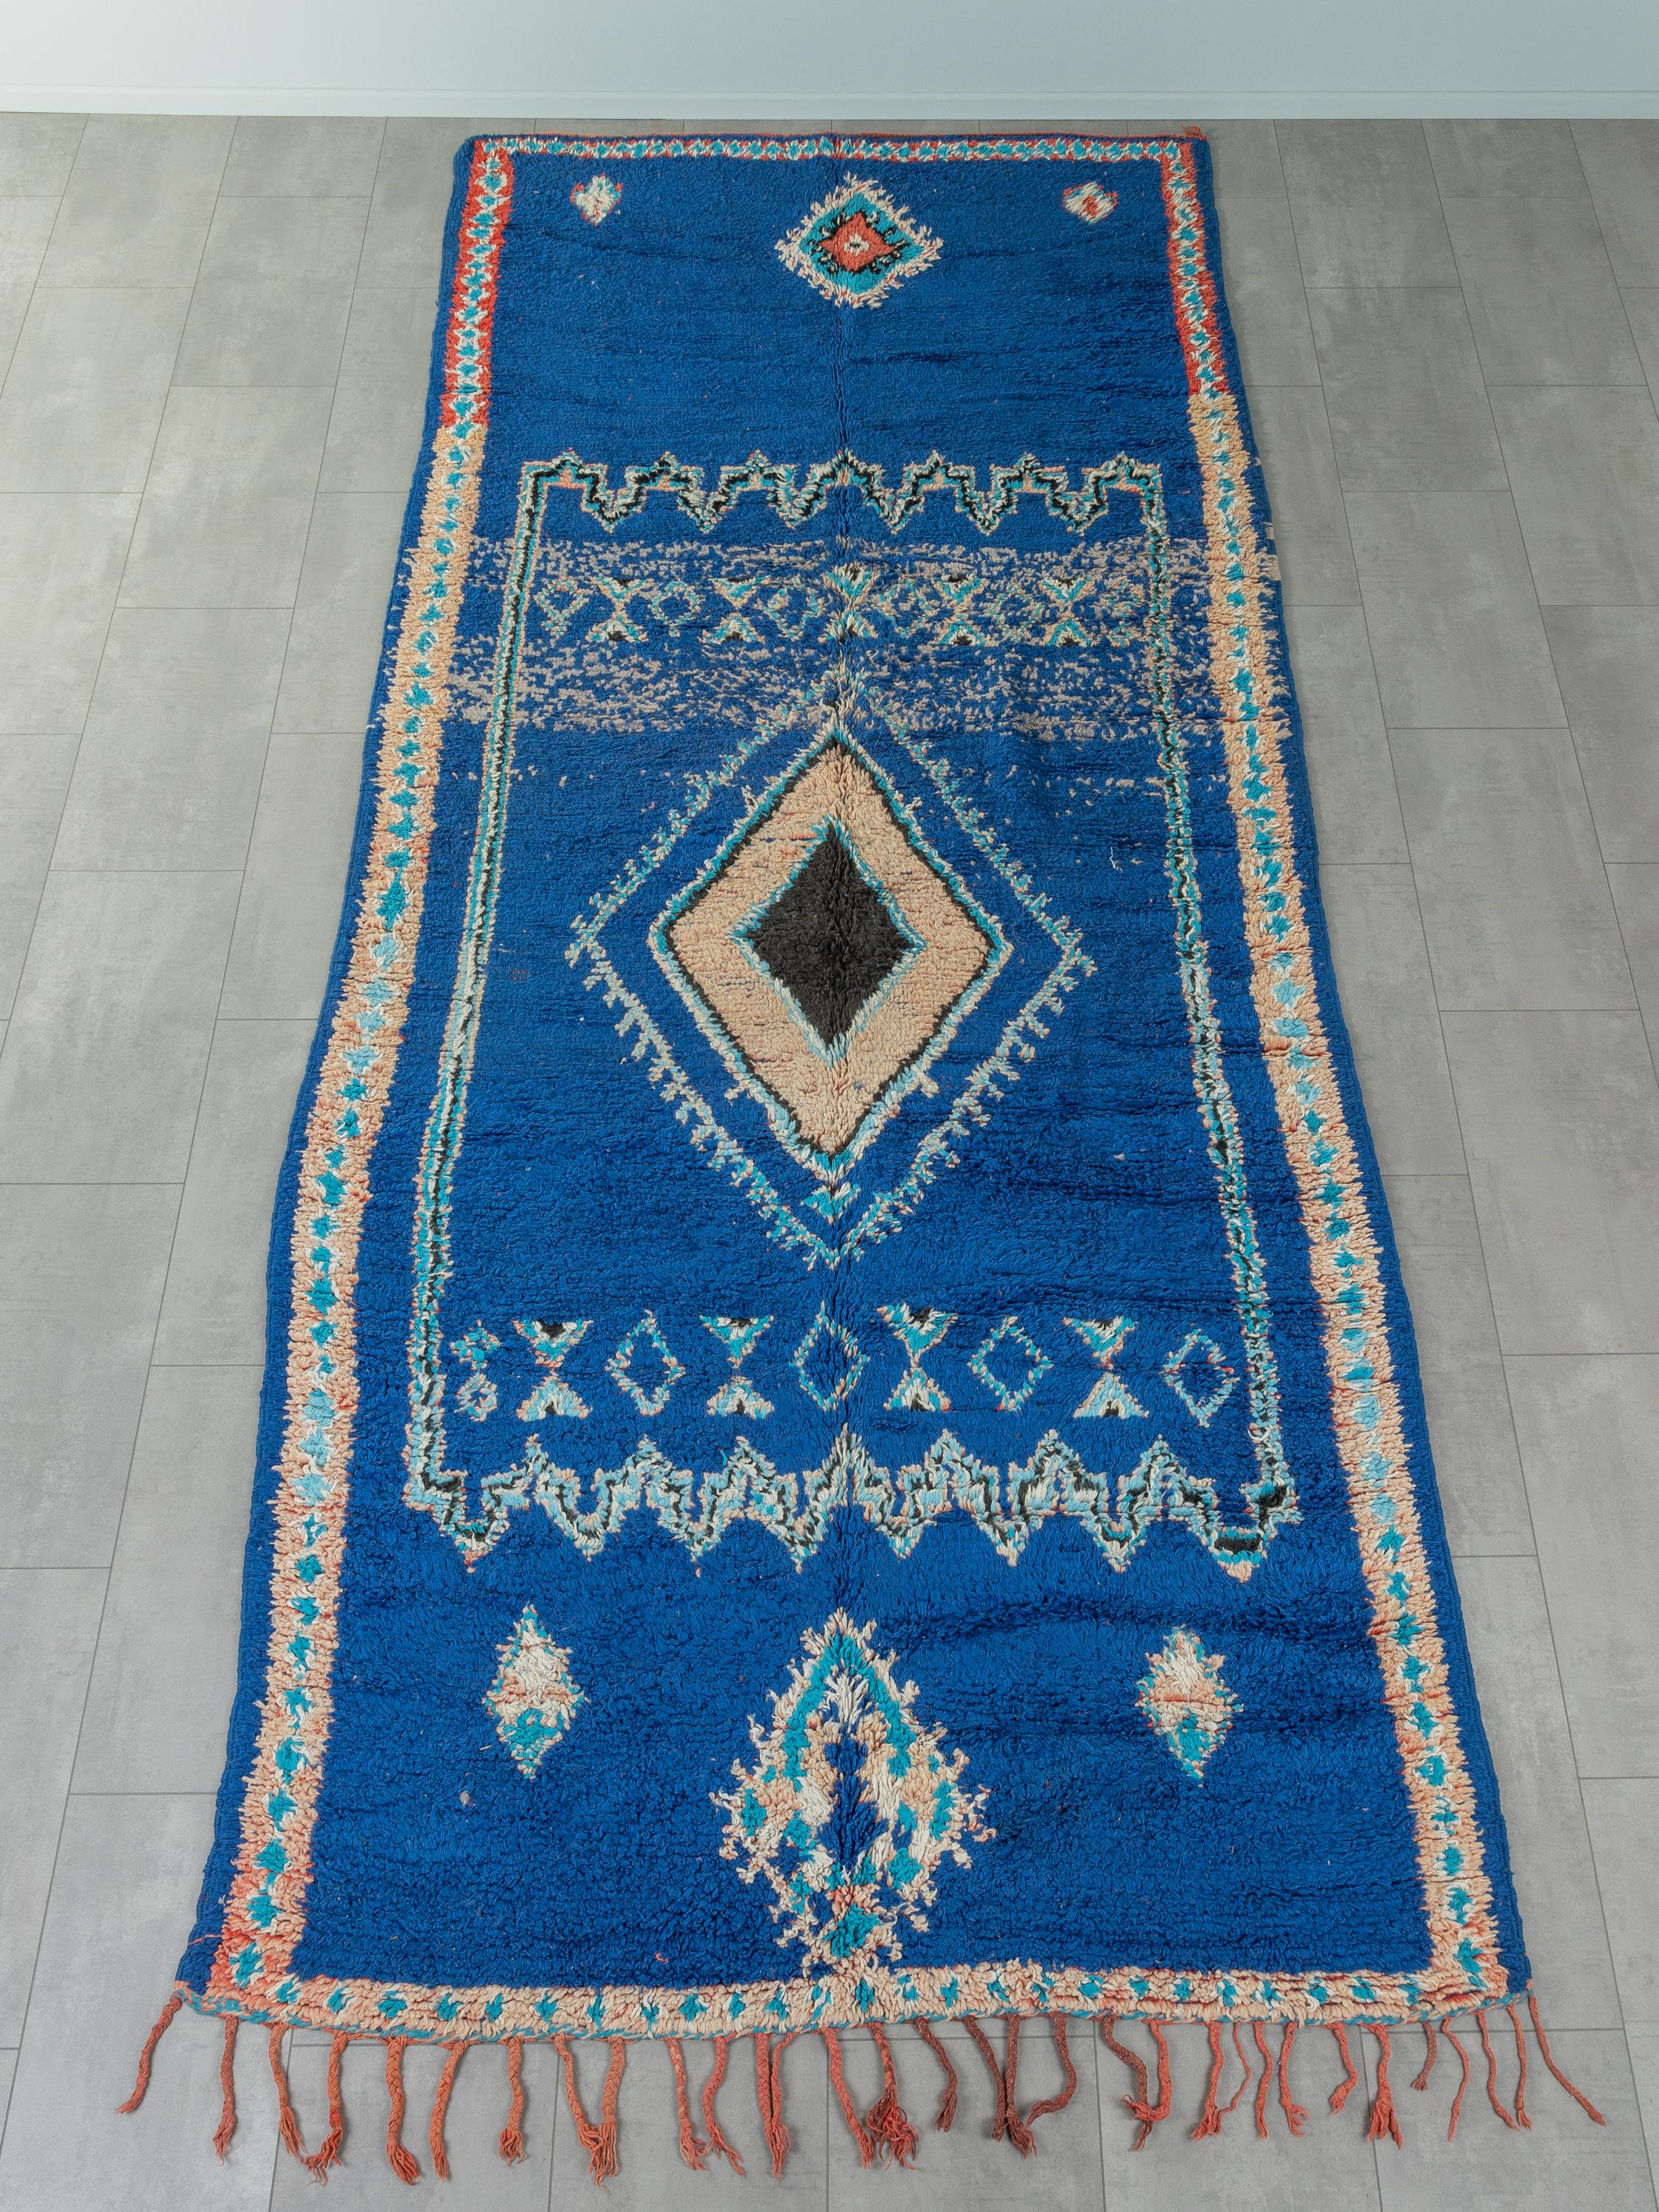 This Vintage Boujad is a 100 % wool rug – soft and comfortable underfoot. Our Berber rugs are handmade, one knot at a time. Each of our Berber rugs is a long-lasting one-of-a-kind piece, created in a sustainable manner with local wool. 

Vintage